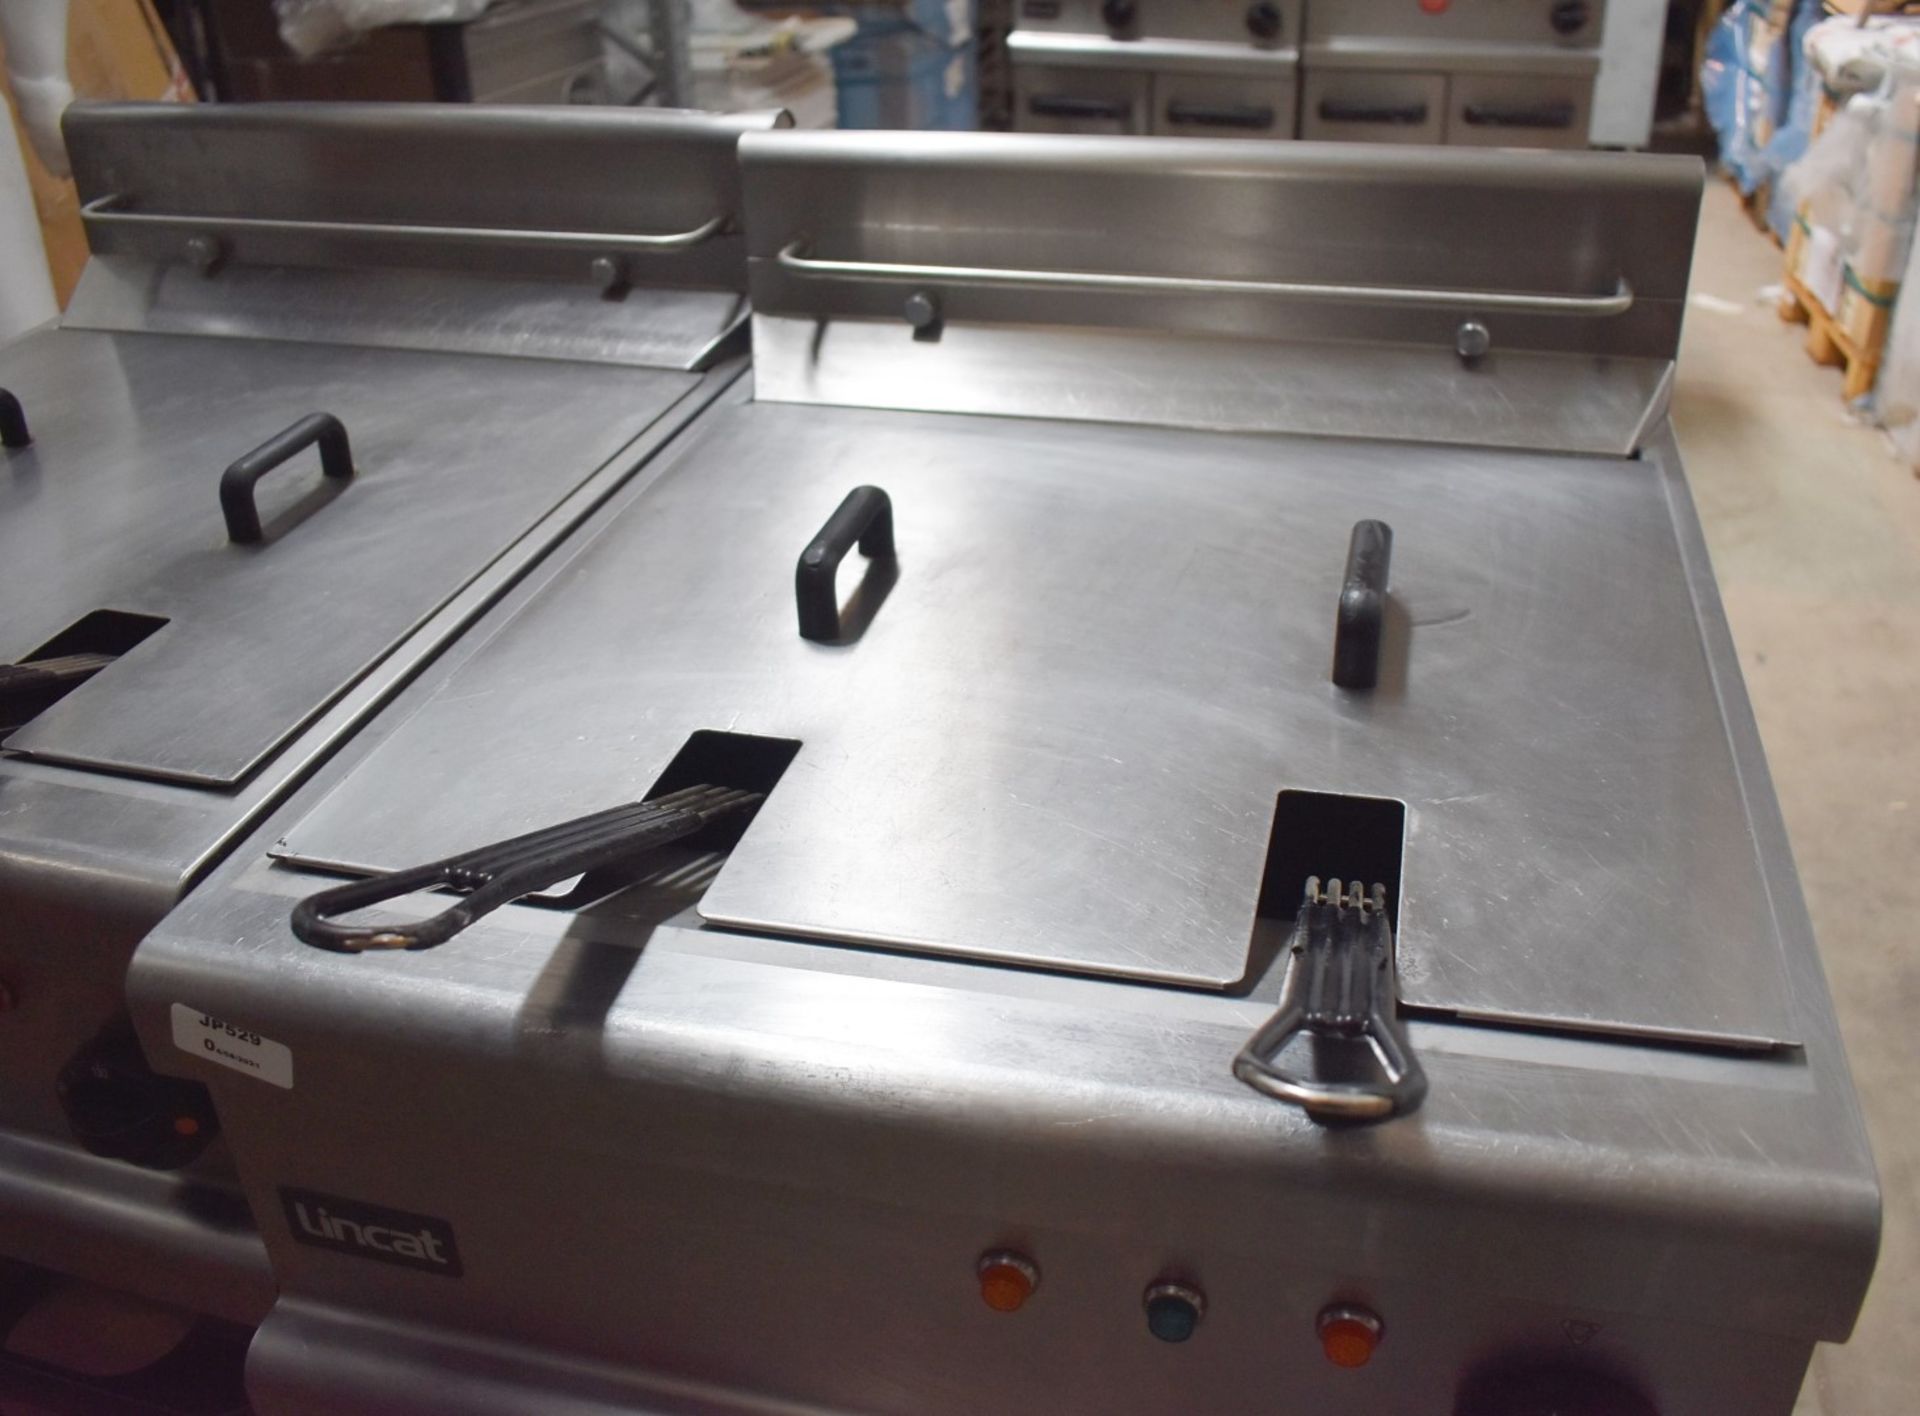 1 x Lincat Opus 700 OE7113 Single Large Tank Electric Fryer With Built In Filteration - 240V / 3PH P - Image 9 of 11